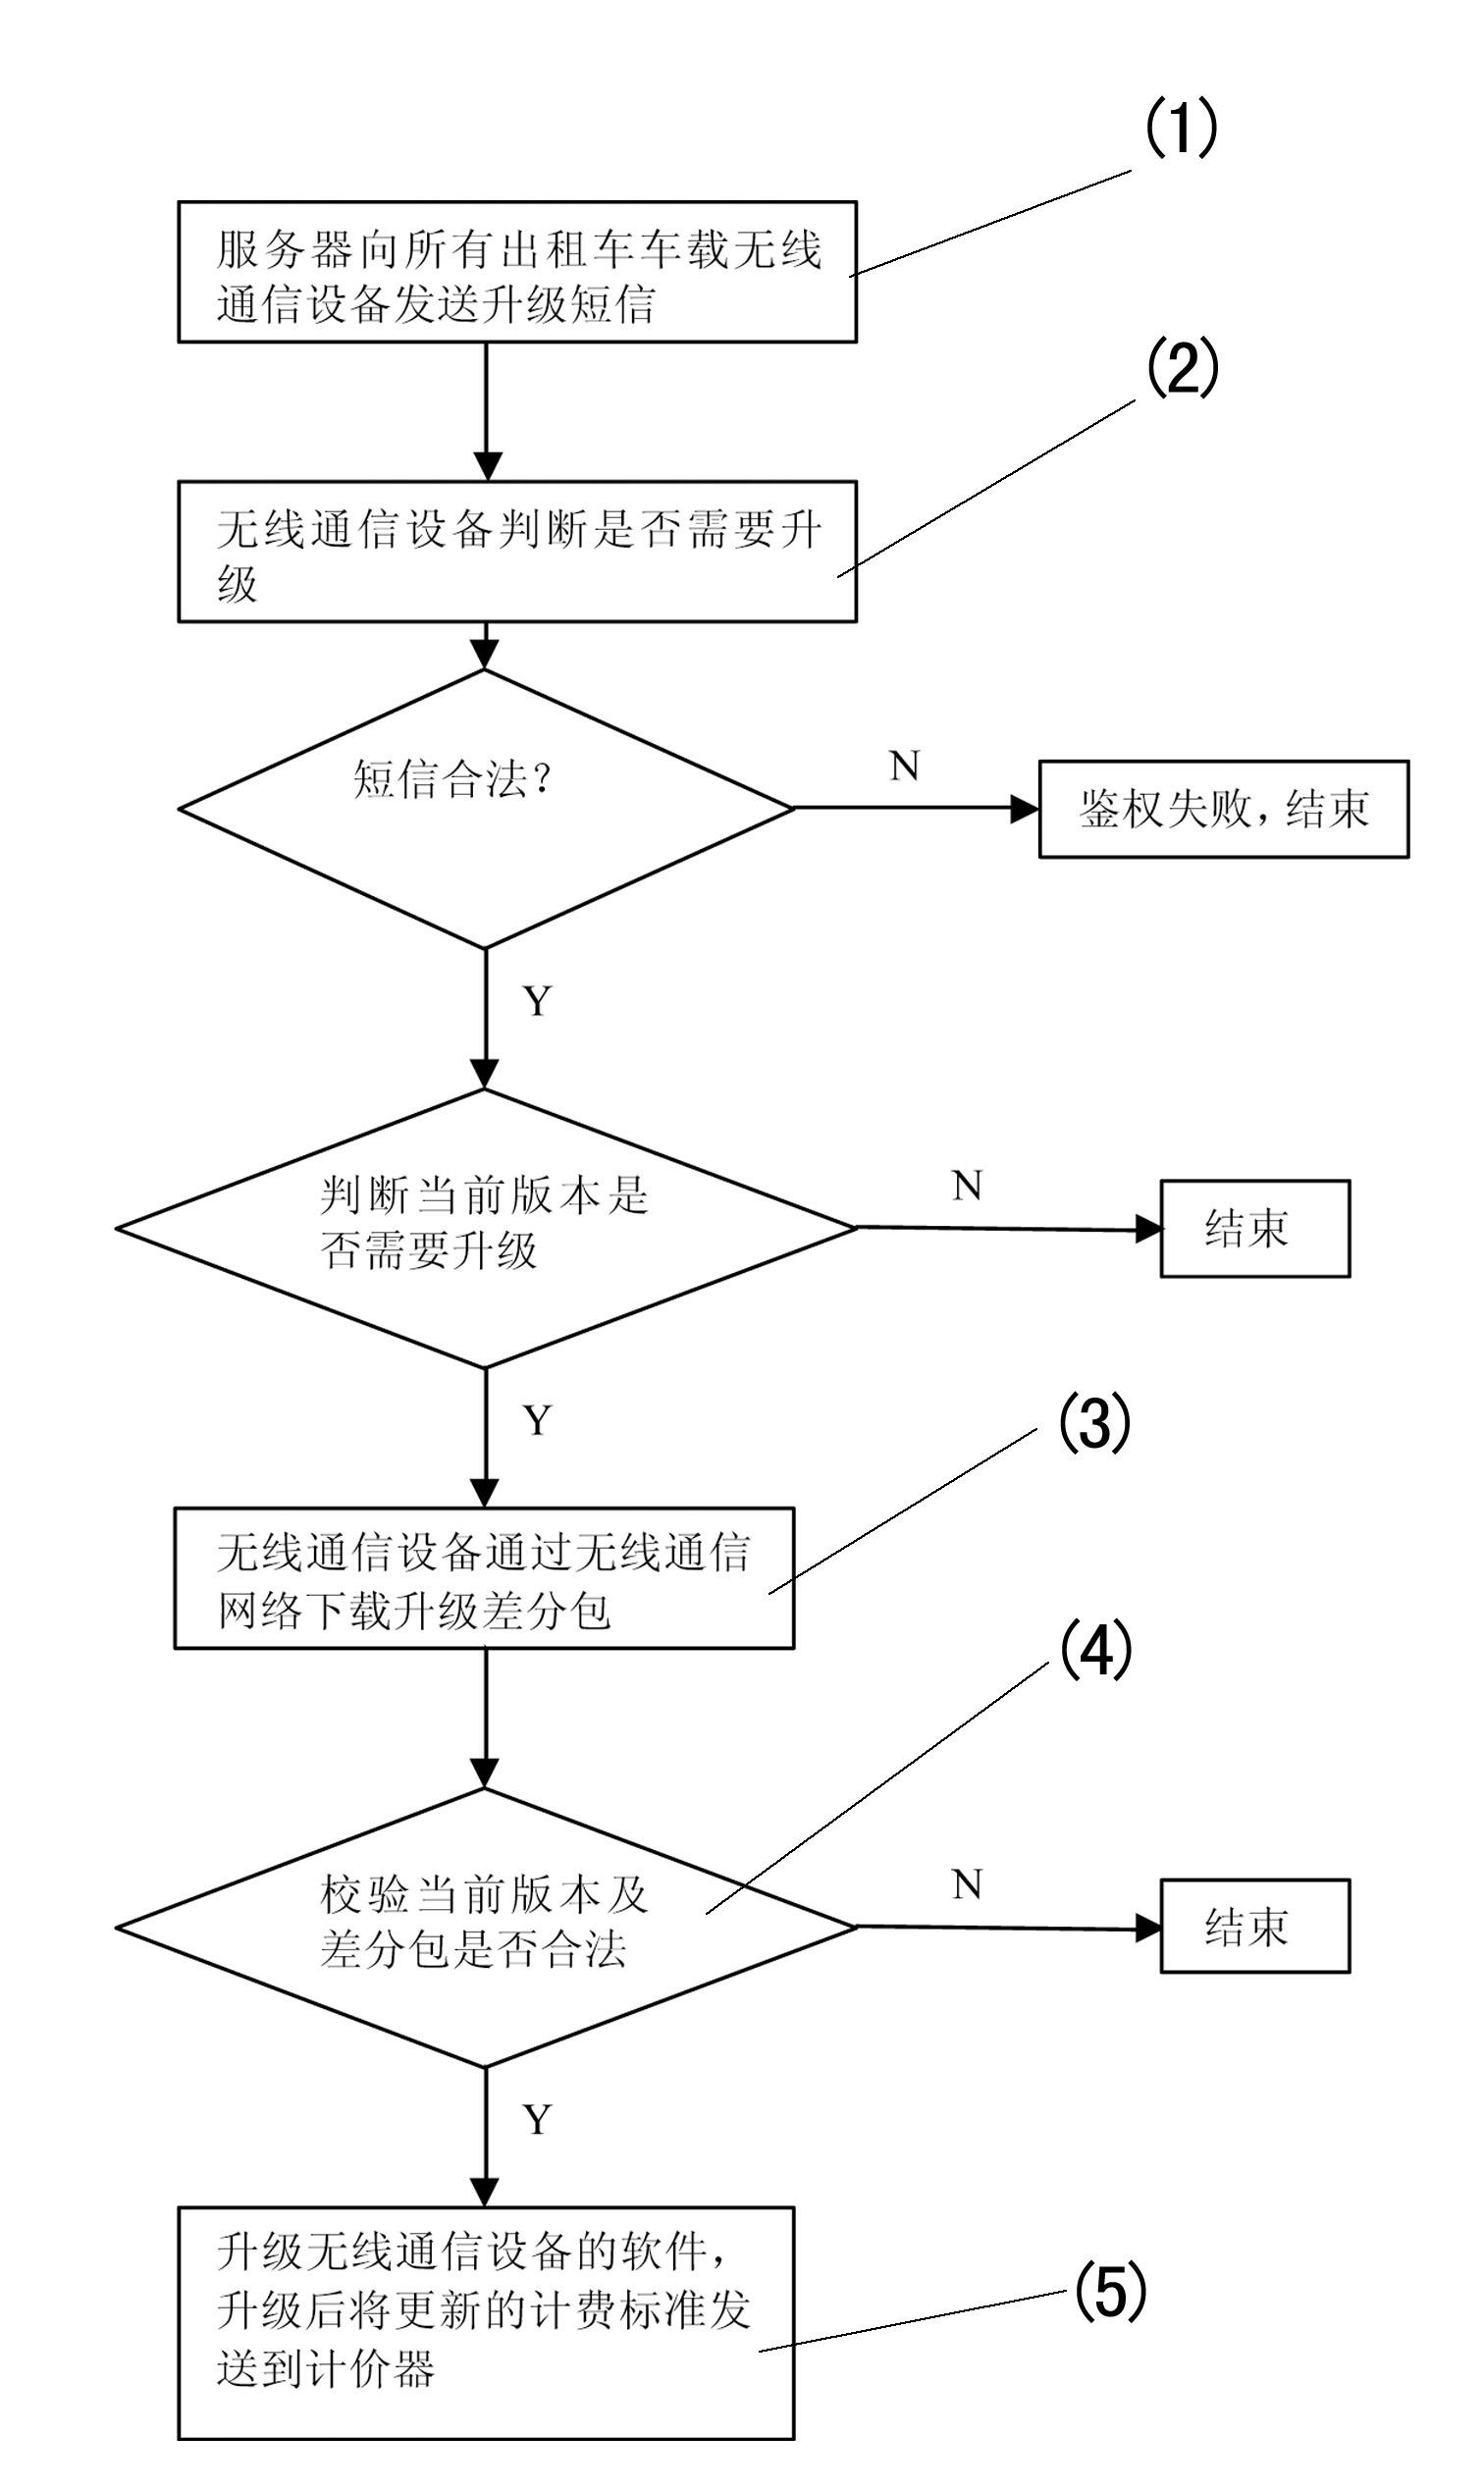 Method for upgrading taximeter in wireless mode and taximeter used thereby